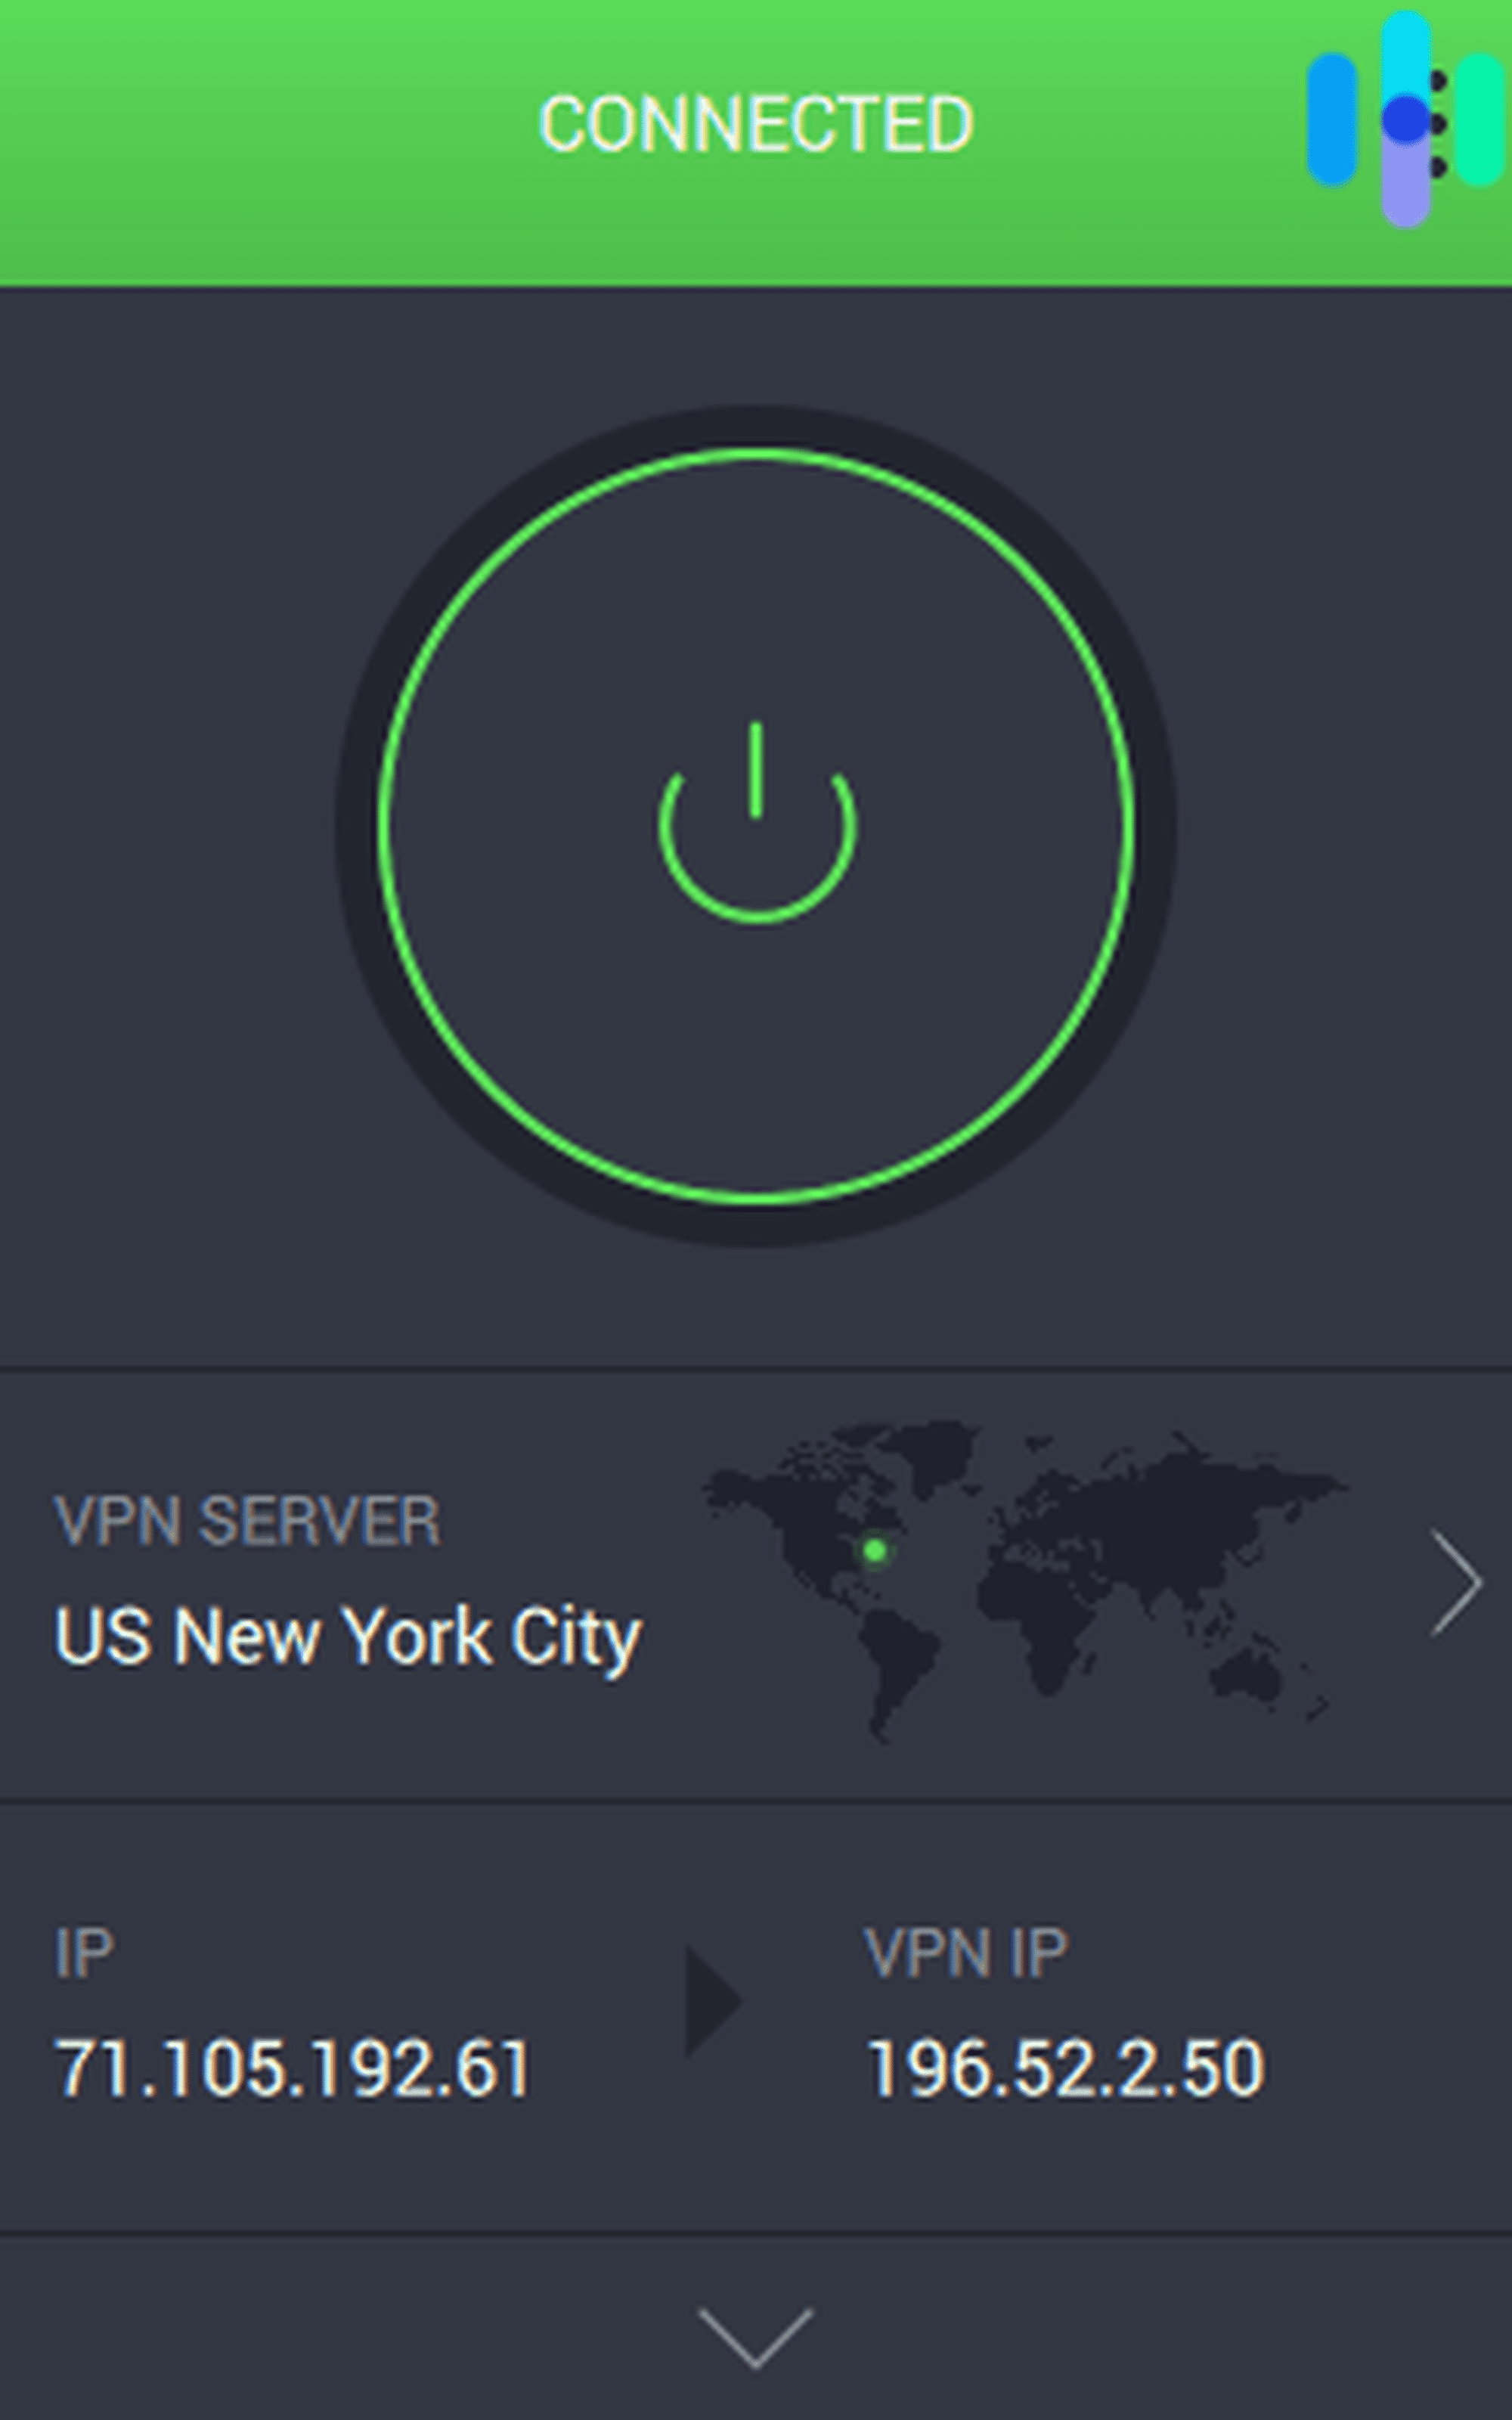 Private Internet Access VPN Connected to a New York City Server